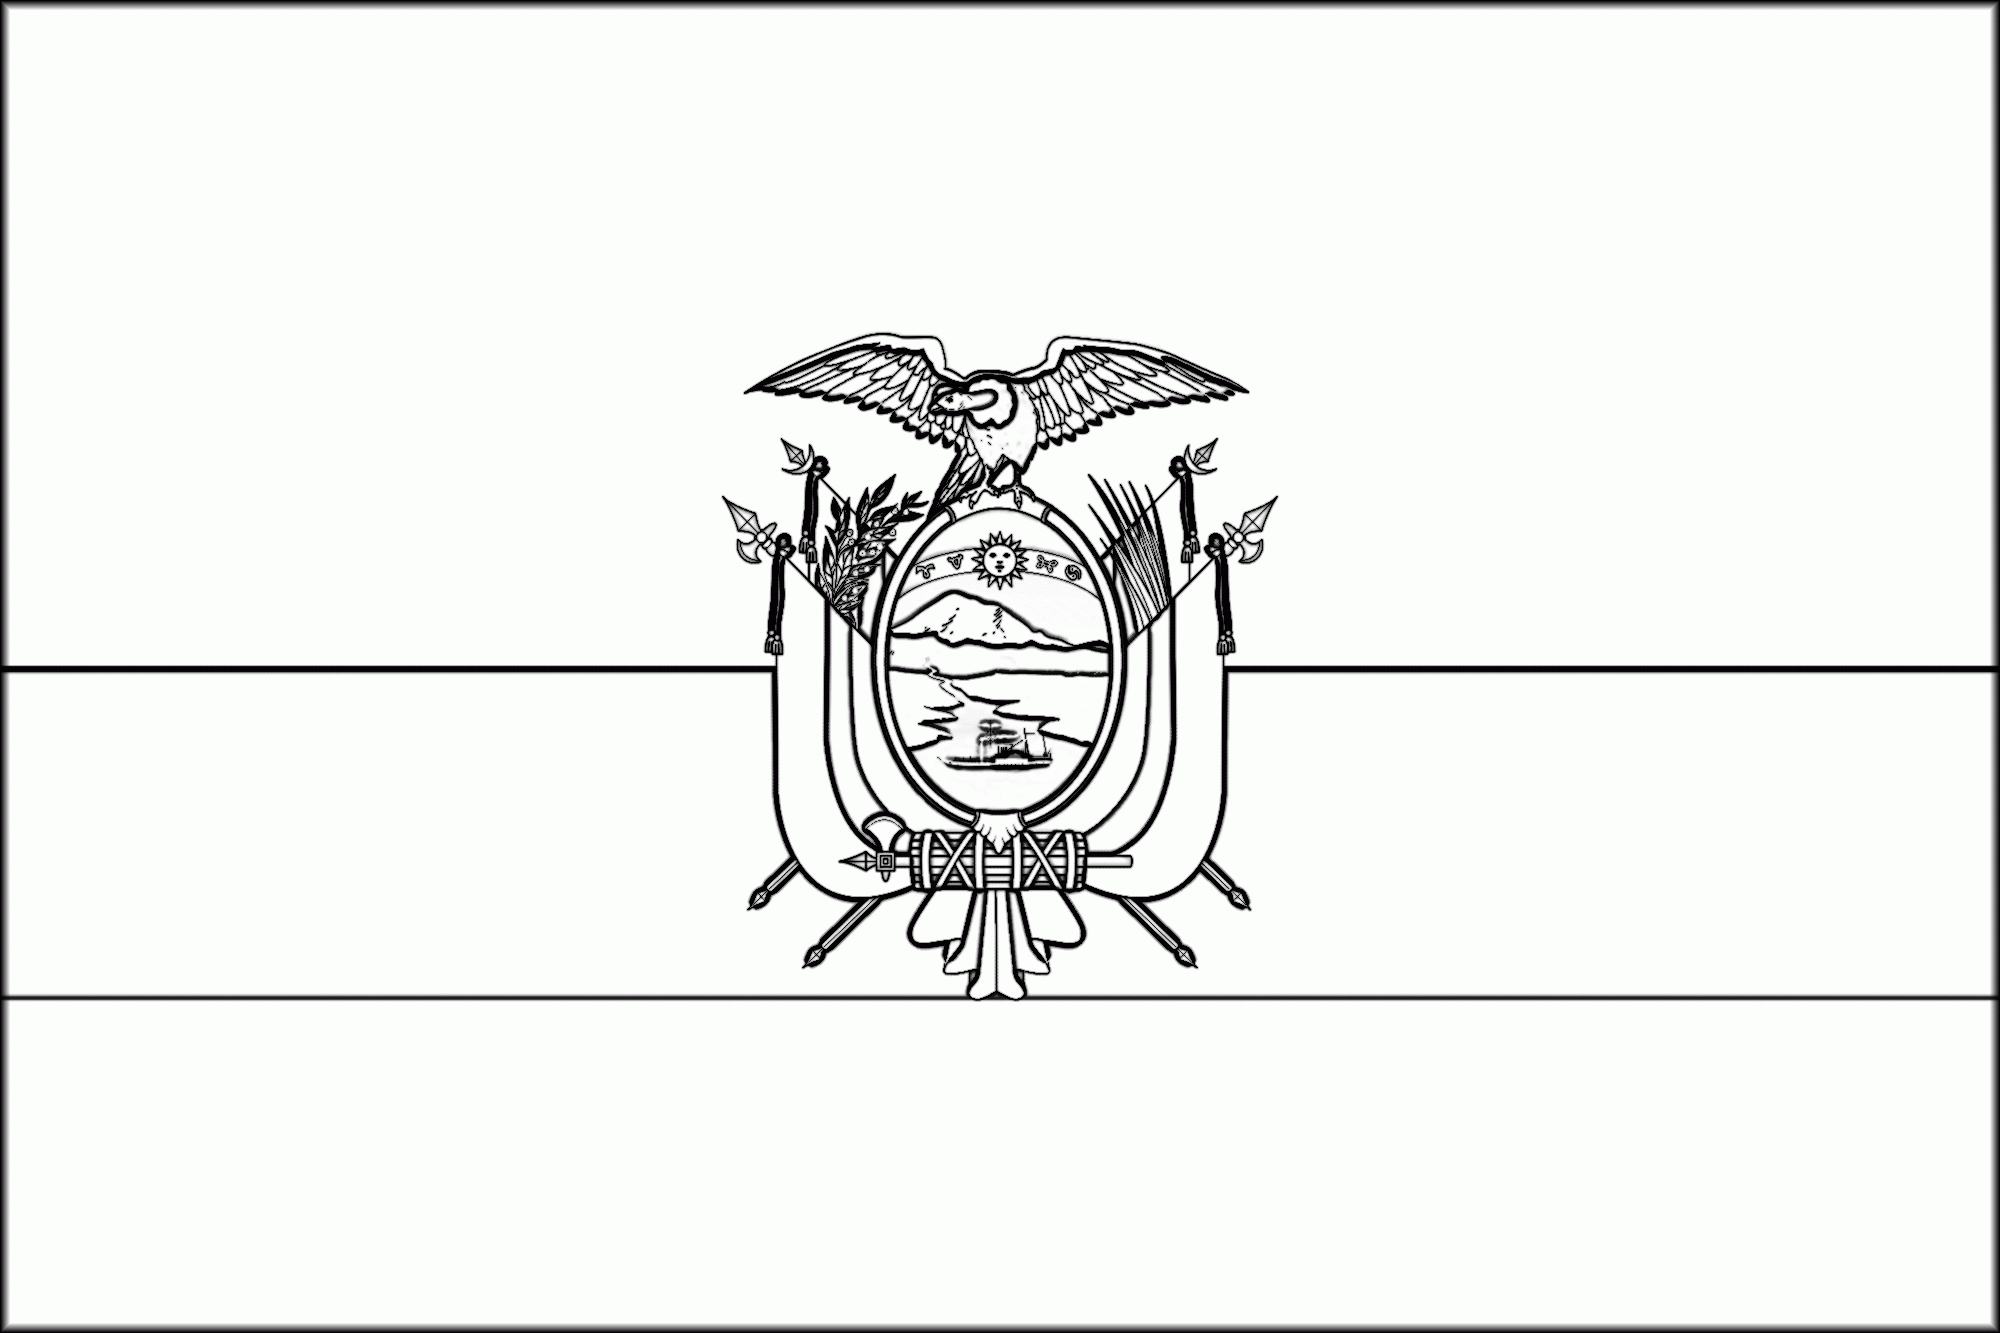 Download or print this amazing coloring page ecuador flag coloring page flag coloring pages ecuador flag coloring pages